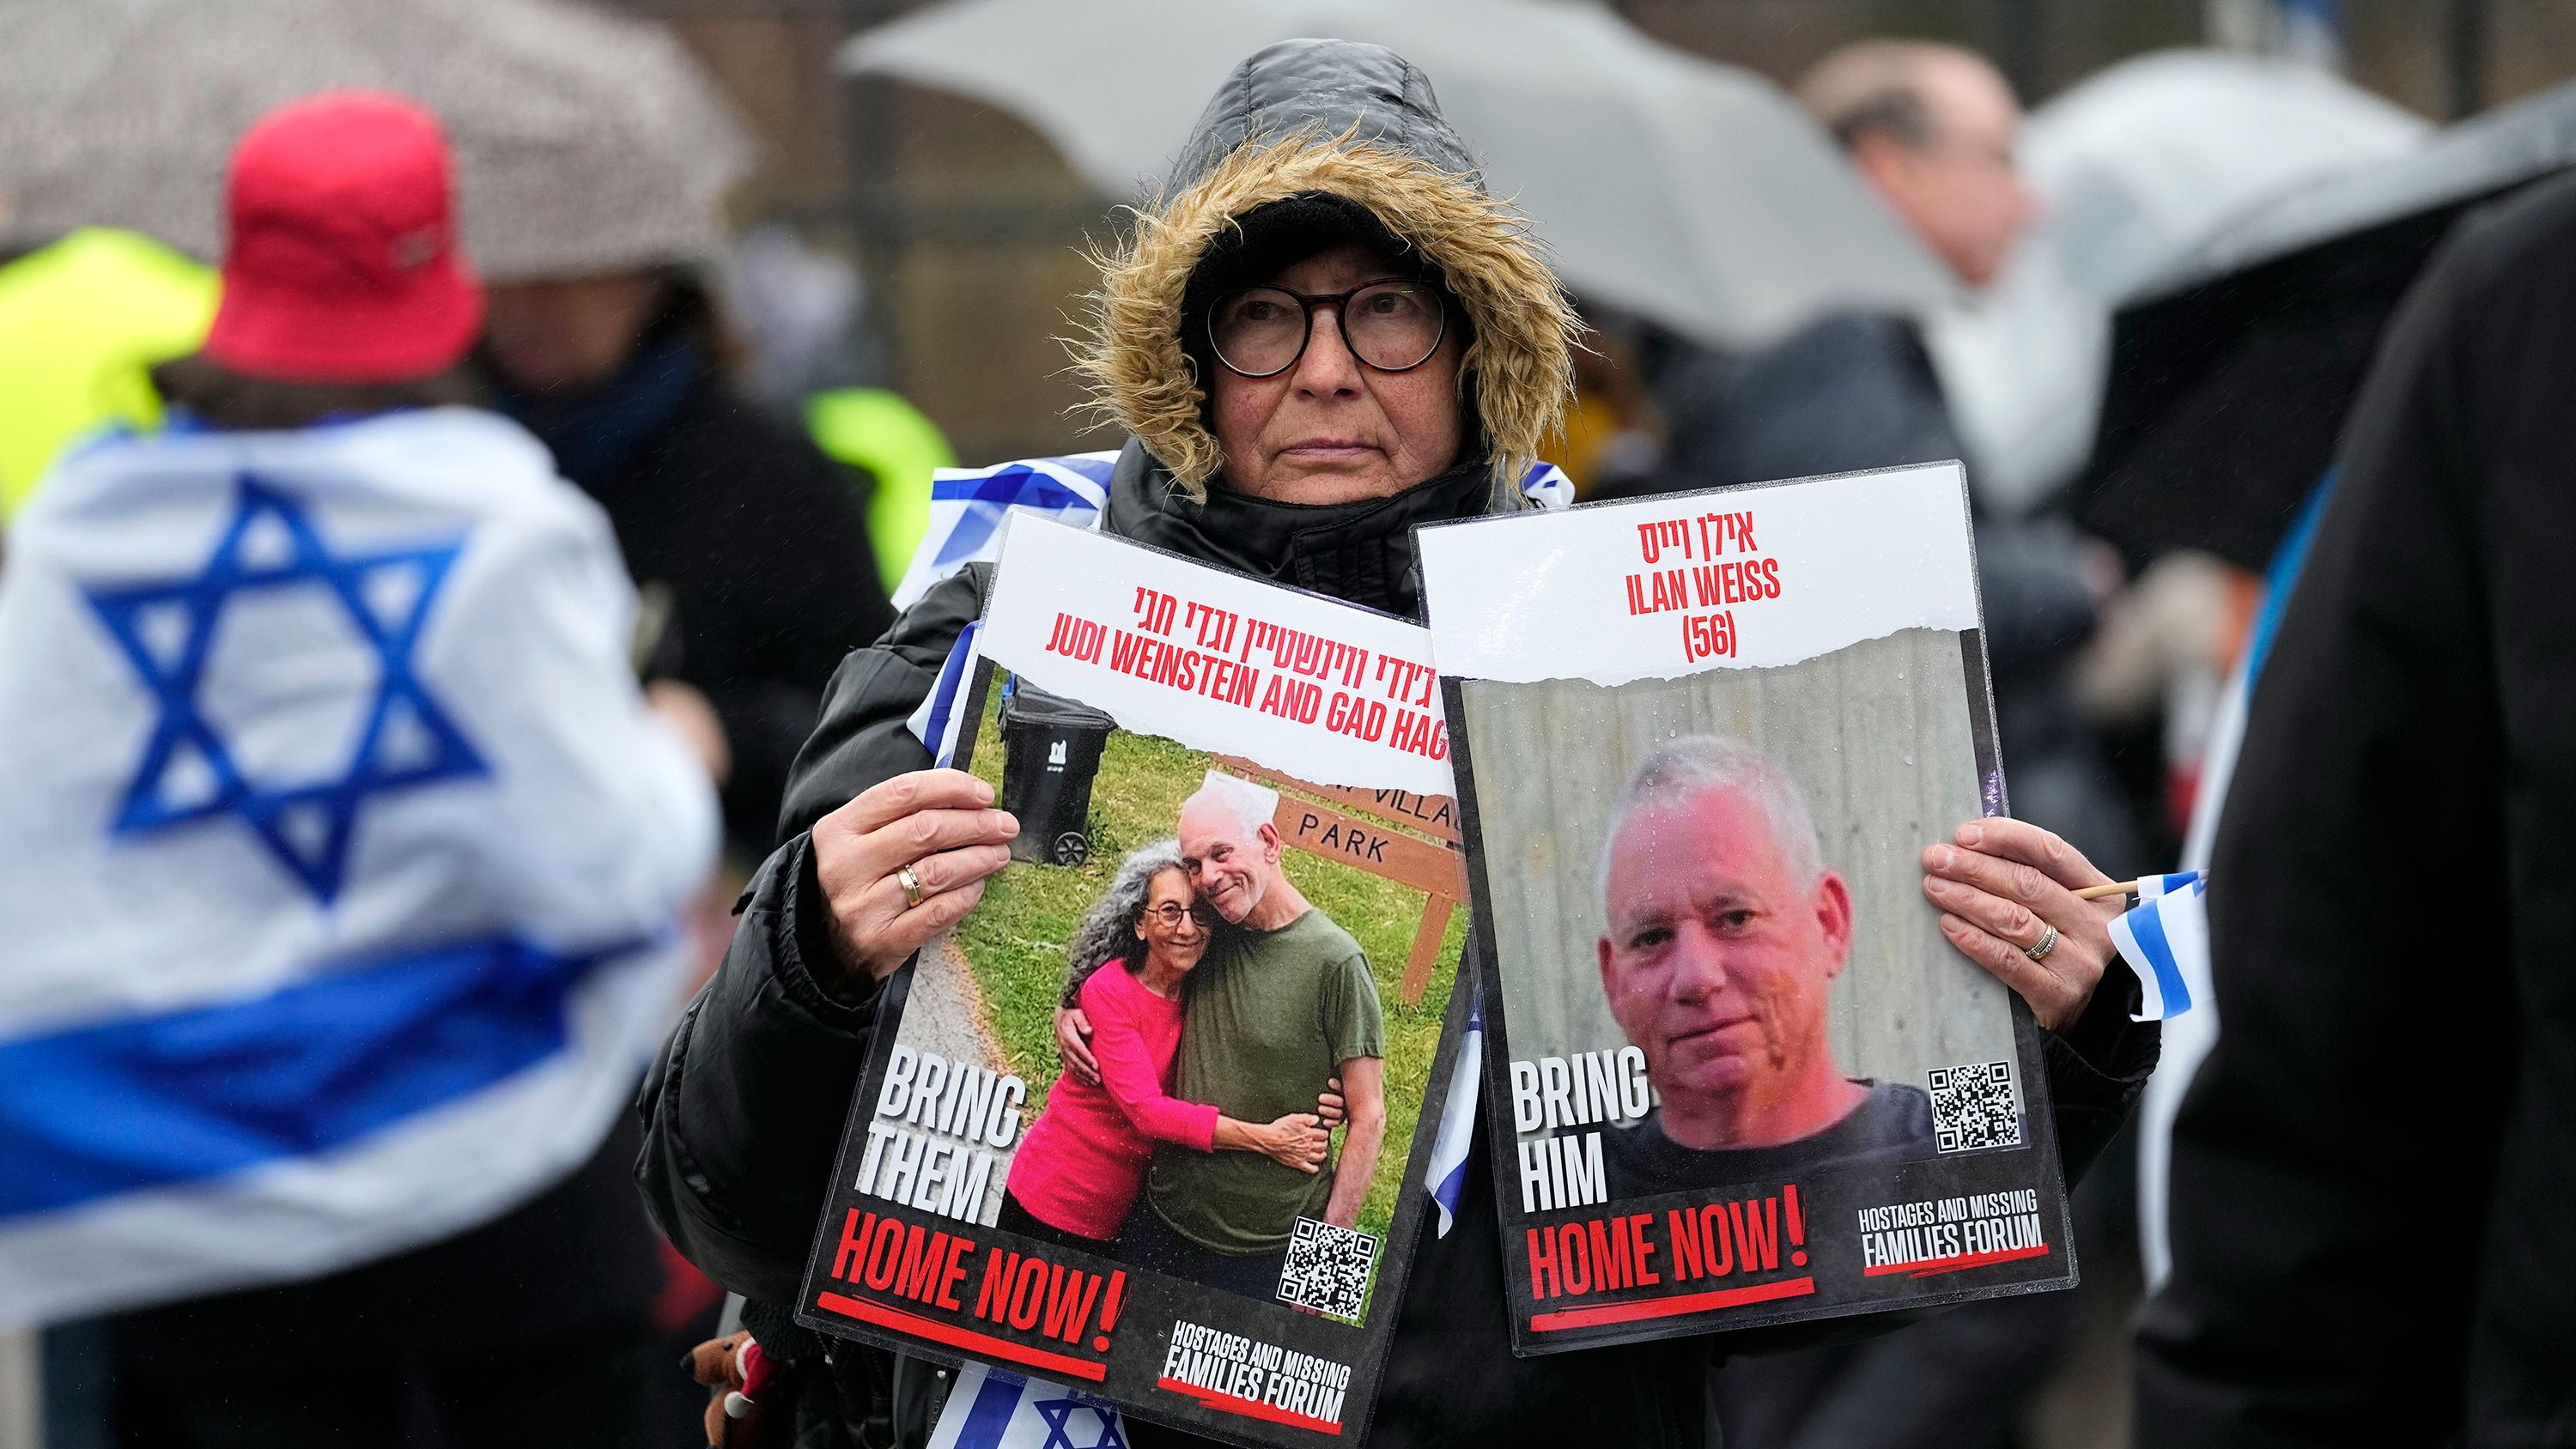 A woman holds images of hostages at The Hague on Wednesday, February 14 during a demonstration.